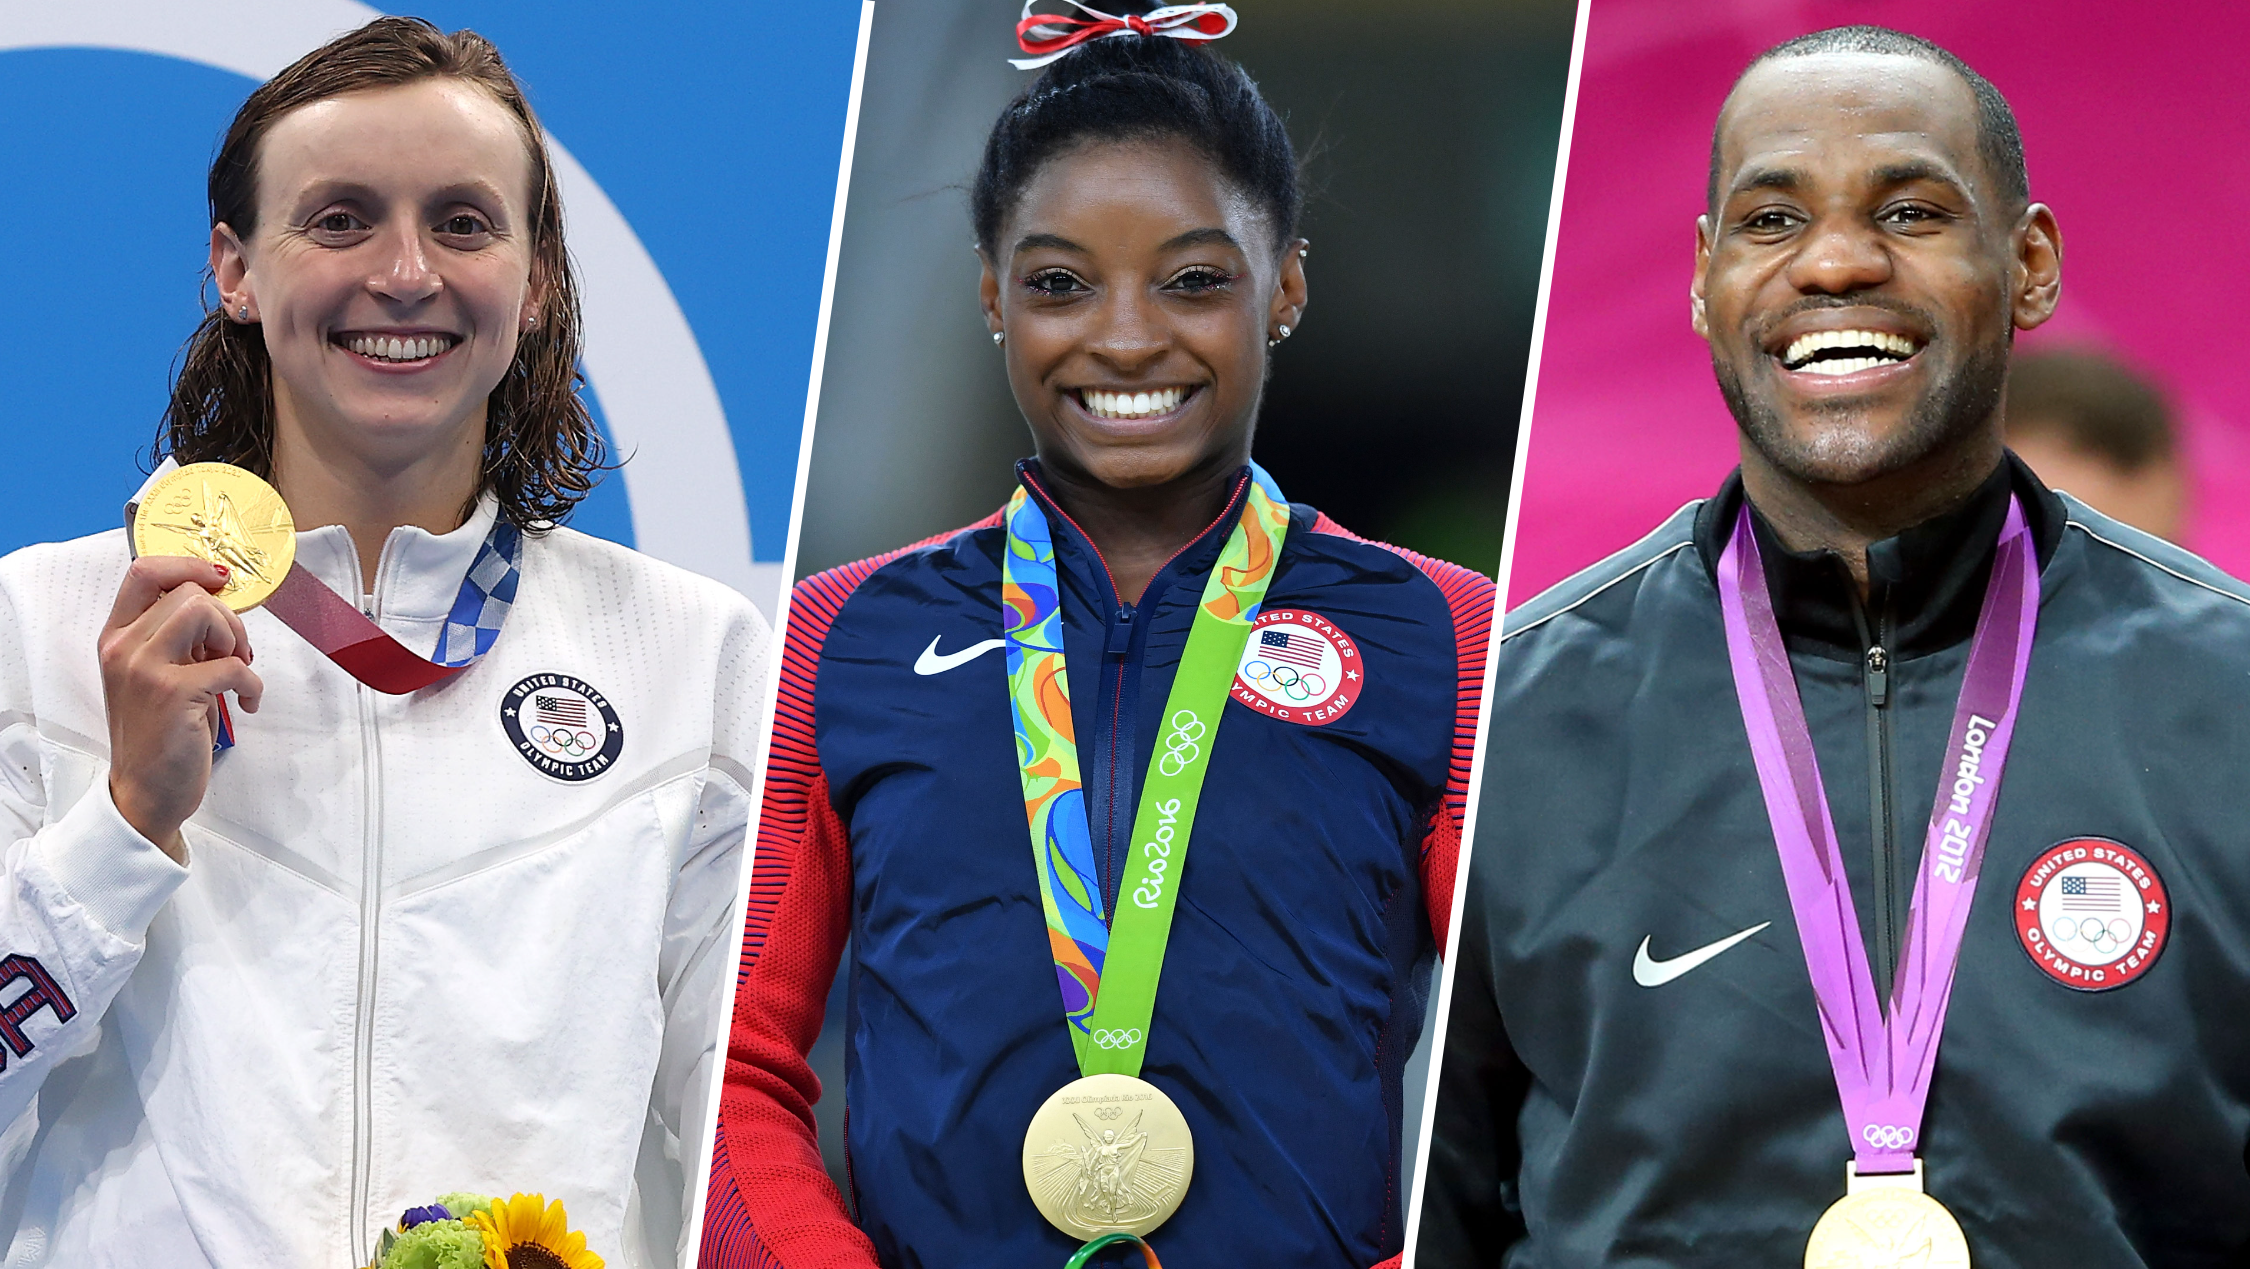 Team USA Olympians at 2024 Olympics in Paris include Biles, James